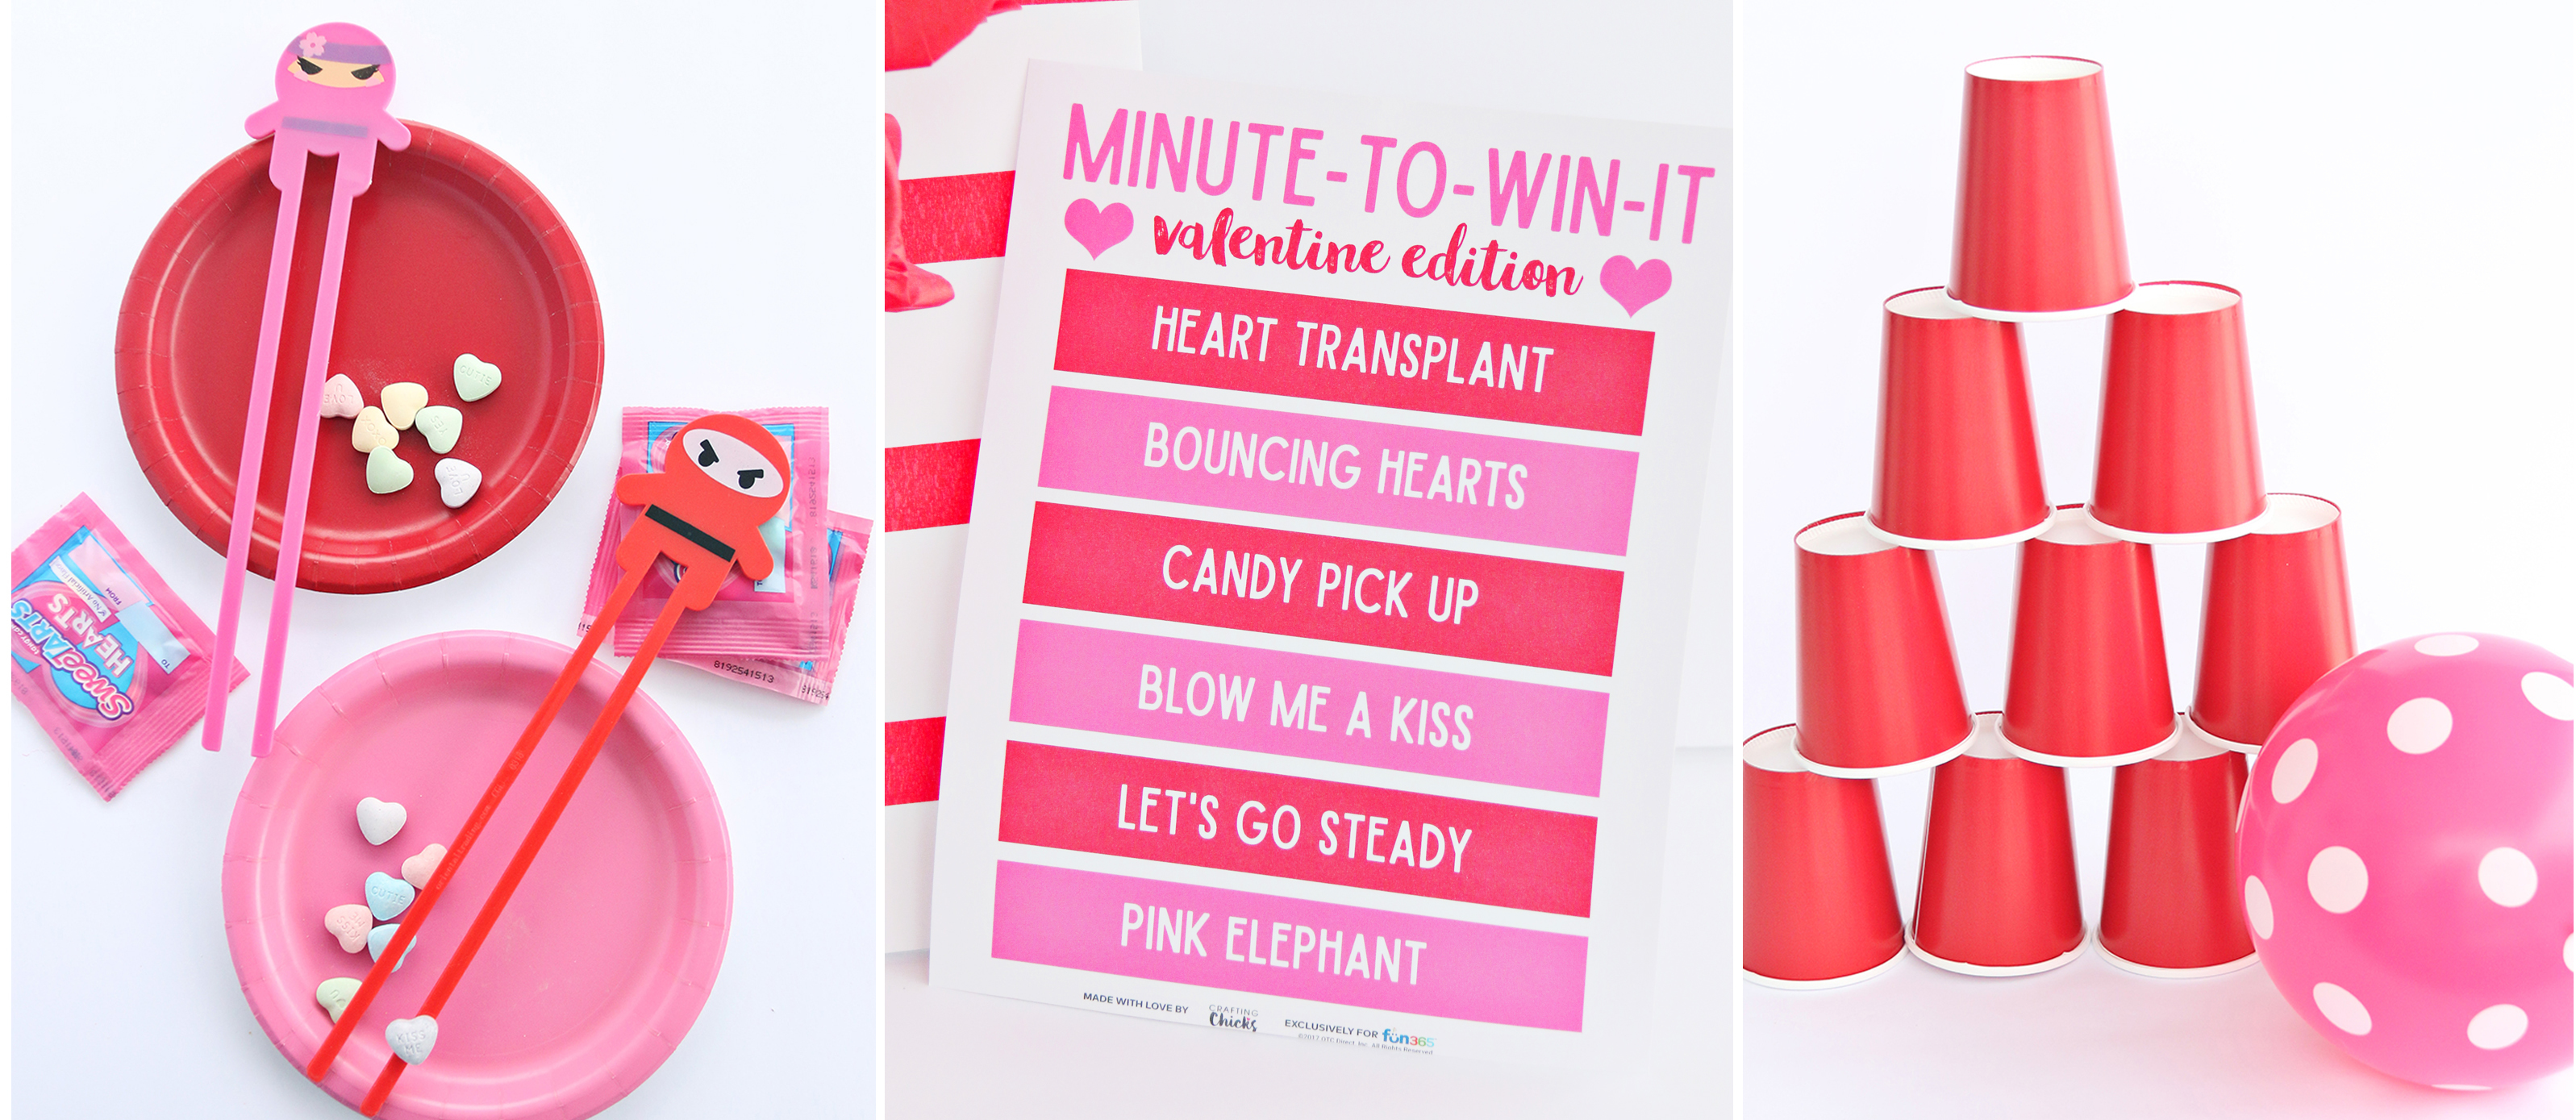 Last Minute Classroom Valentine Printables for Valentine's Day